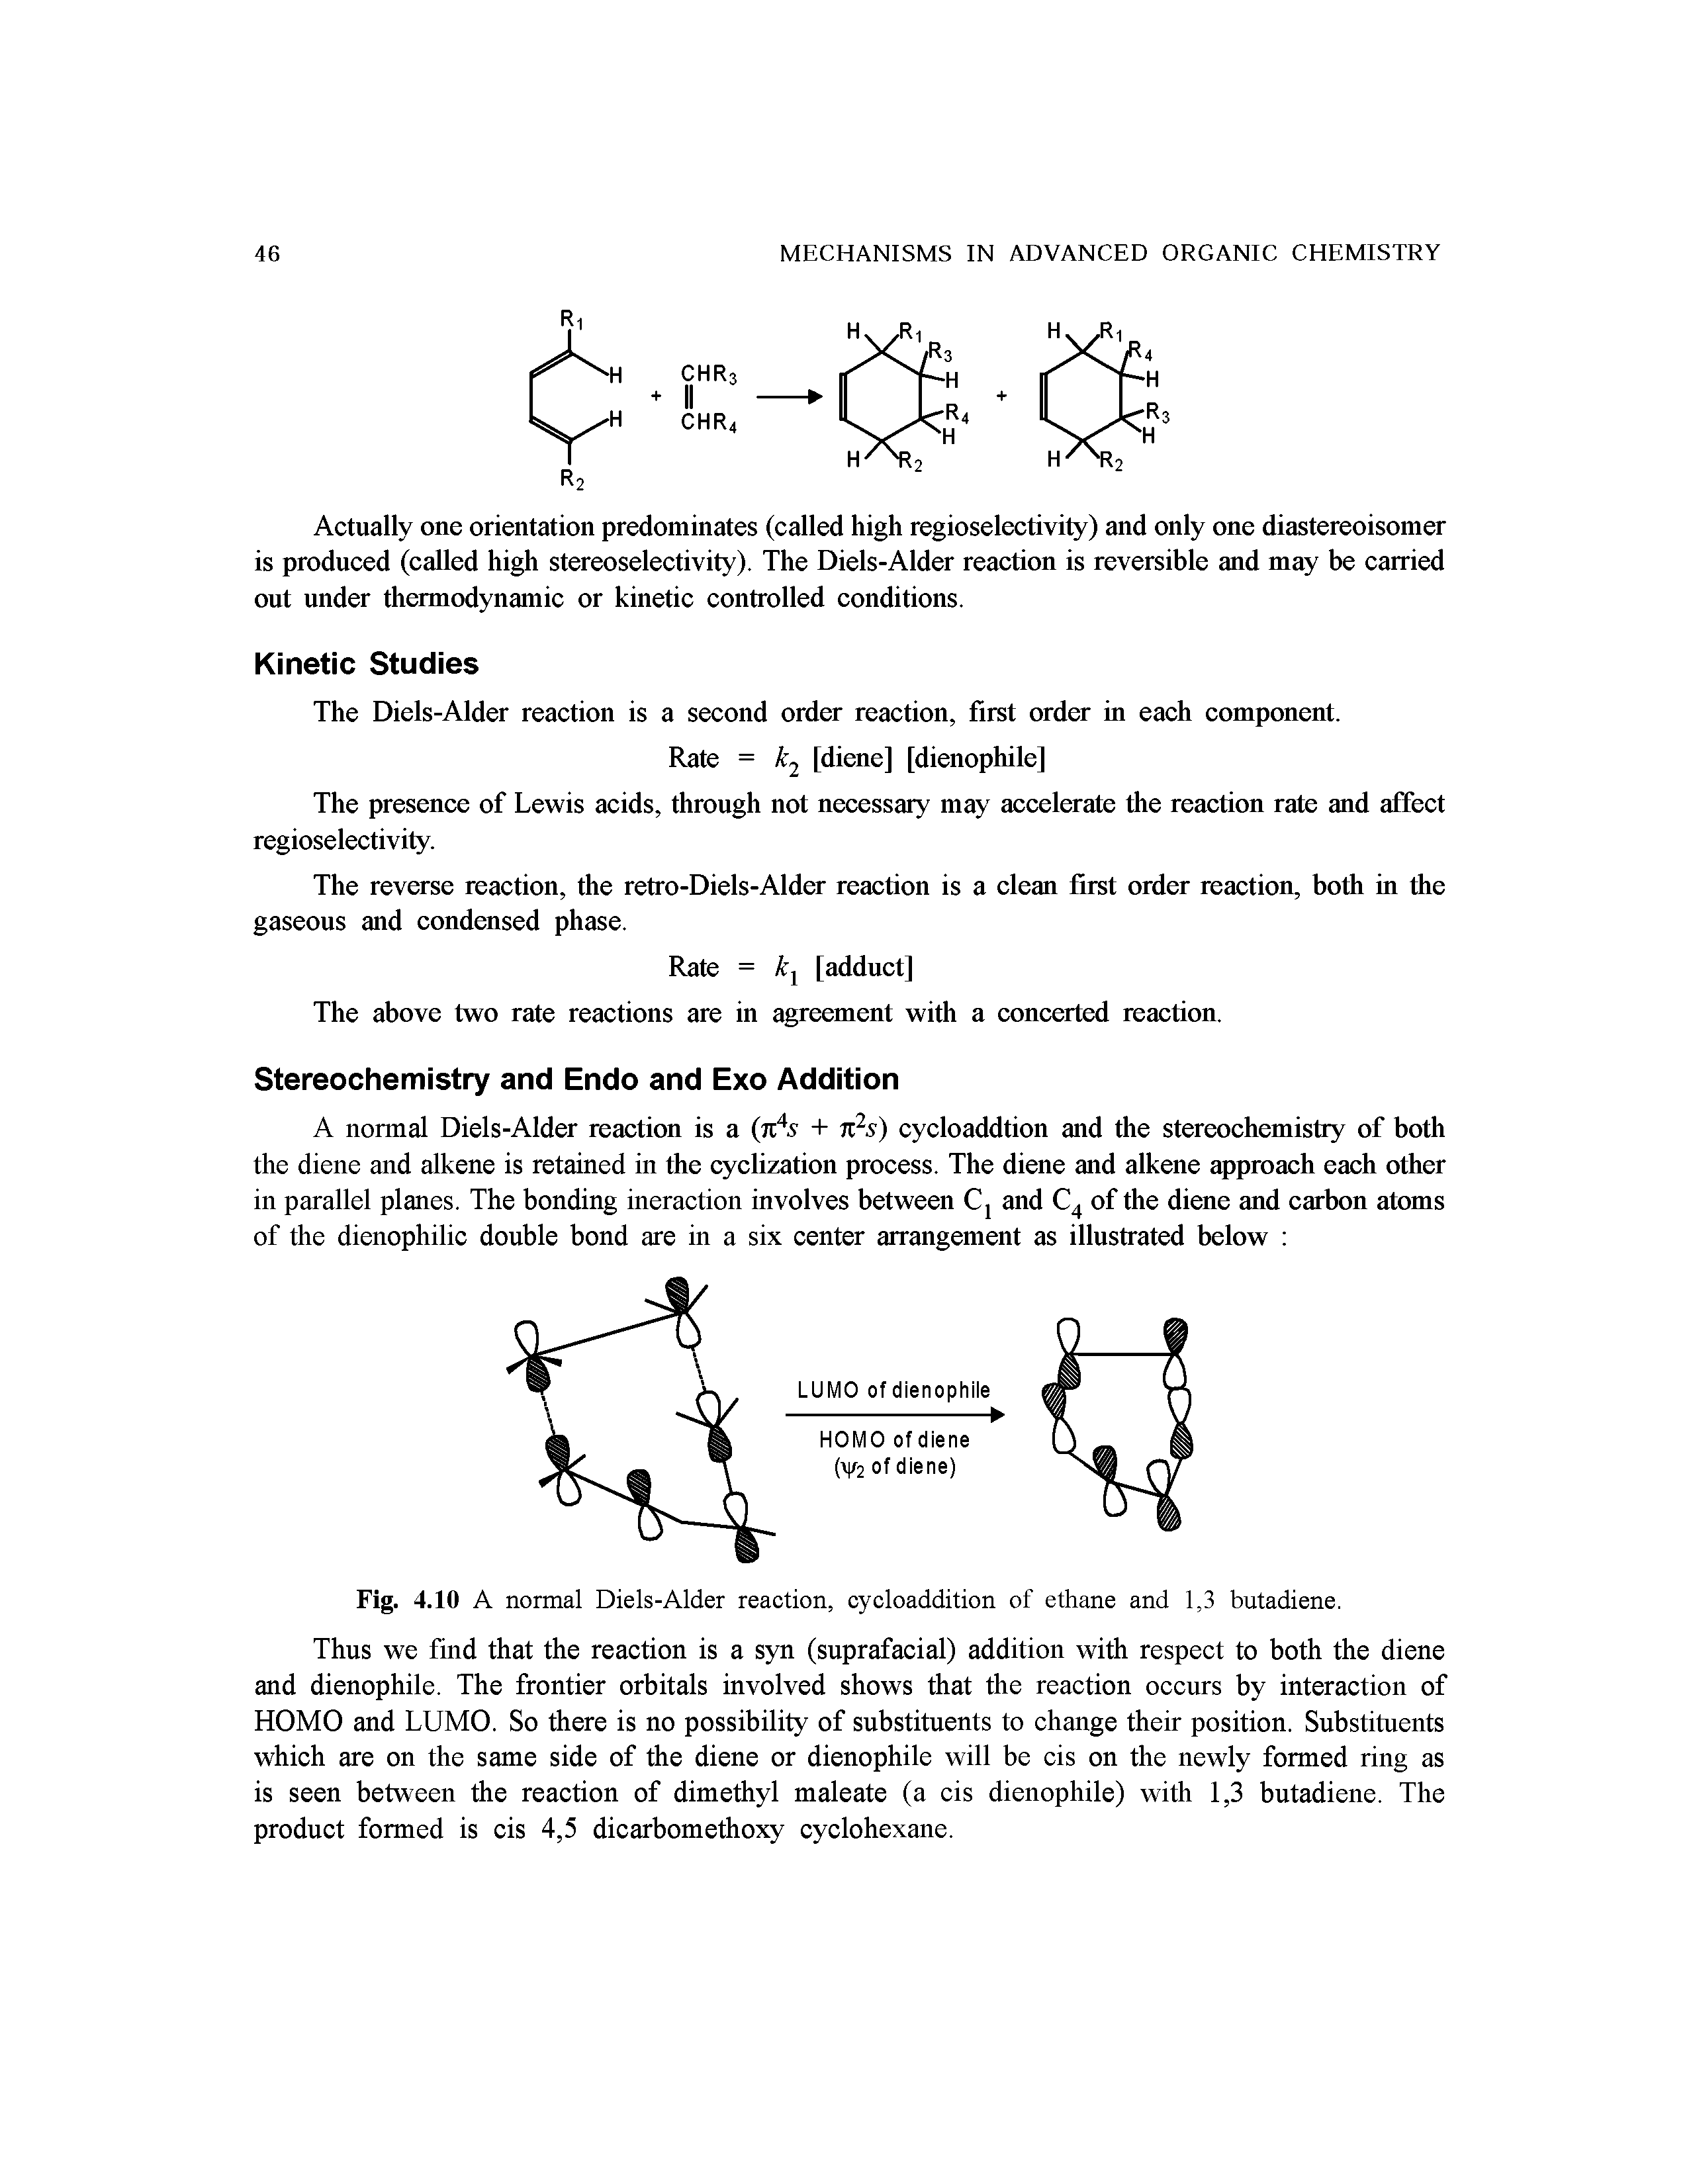 Fig. 4.10 A normal Diels-Alder reaction, cycloaddition of ethane and 1,3 butadiene.